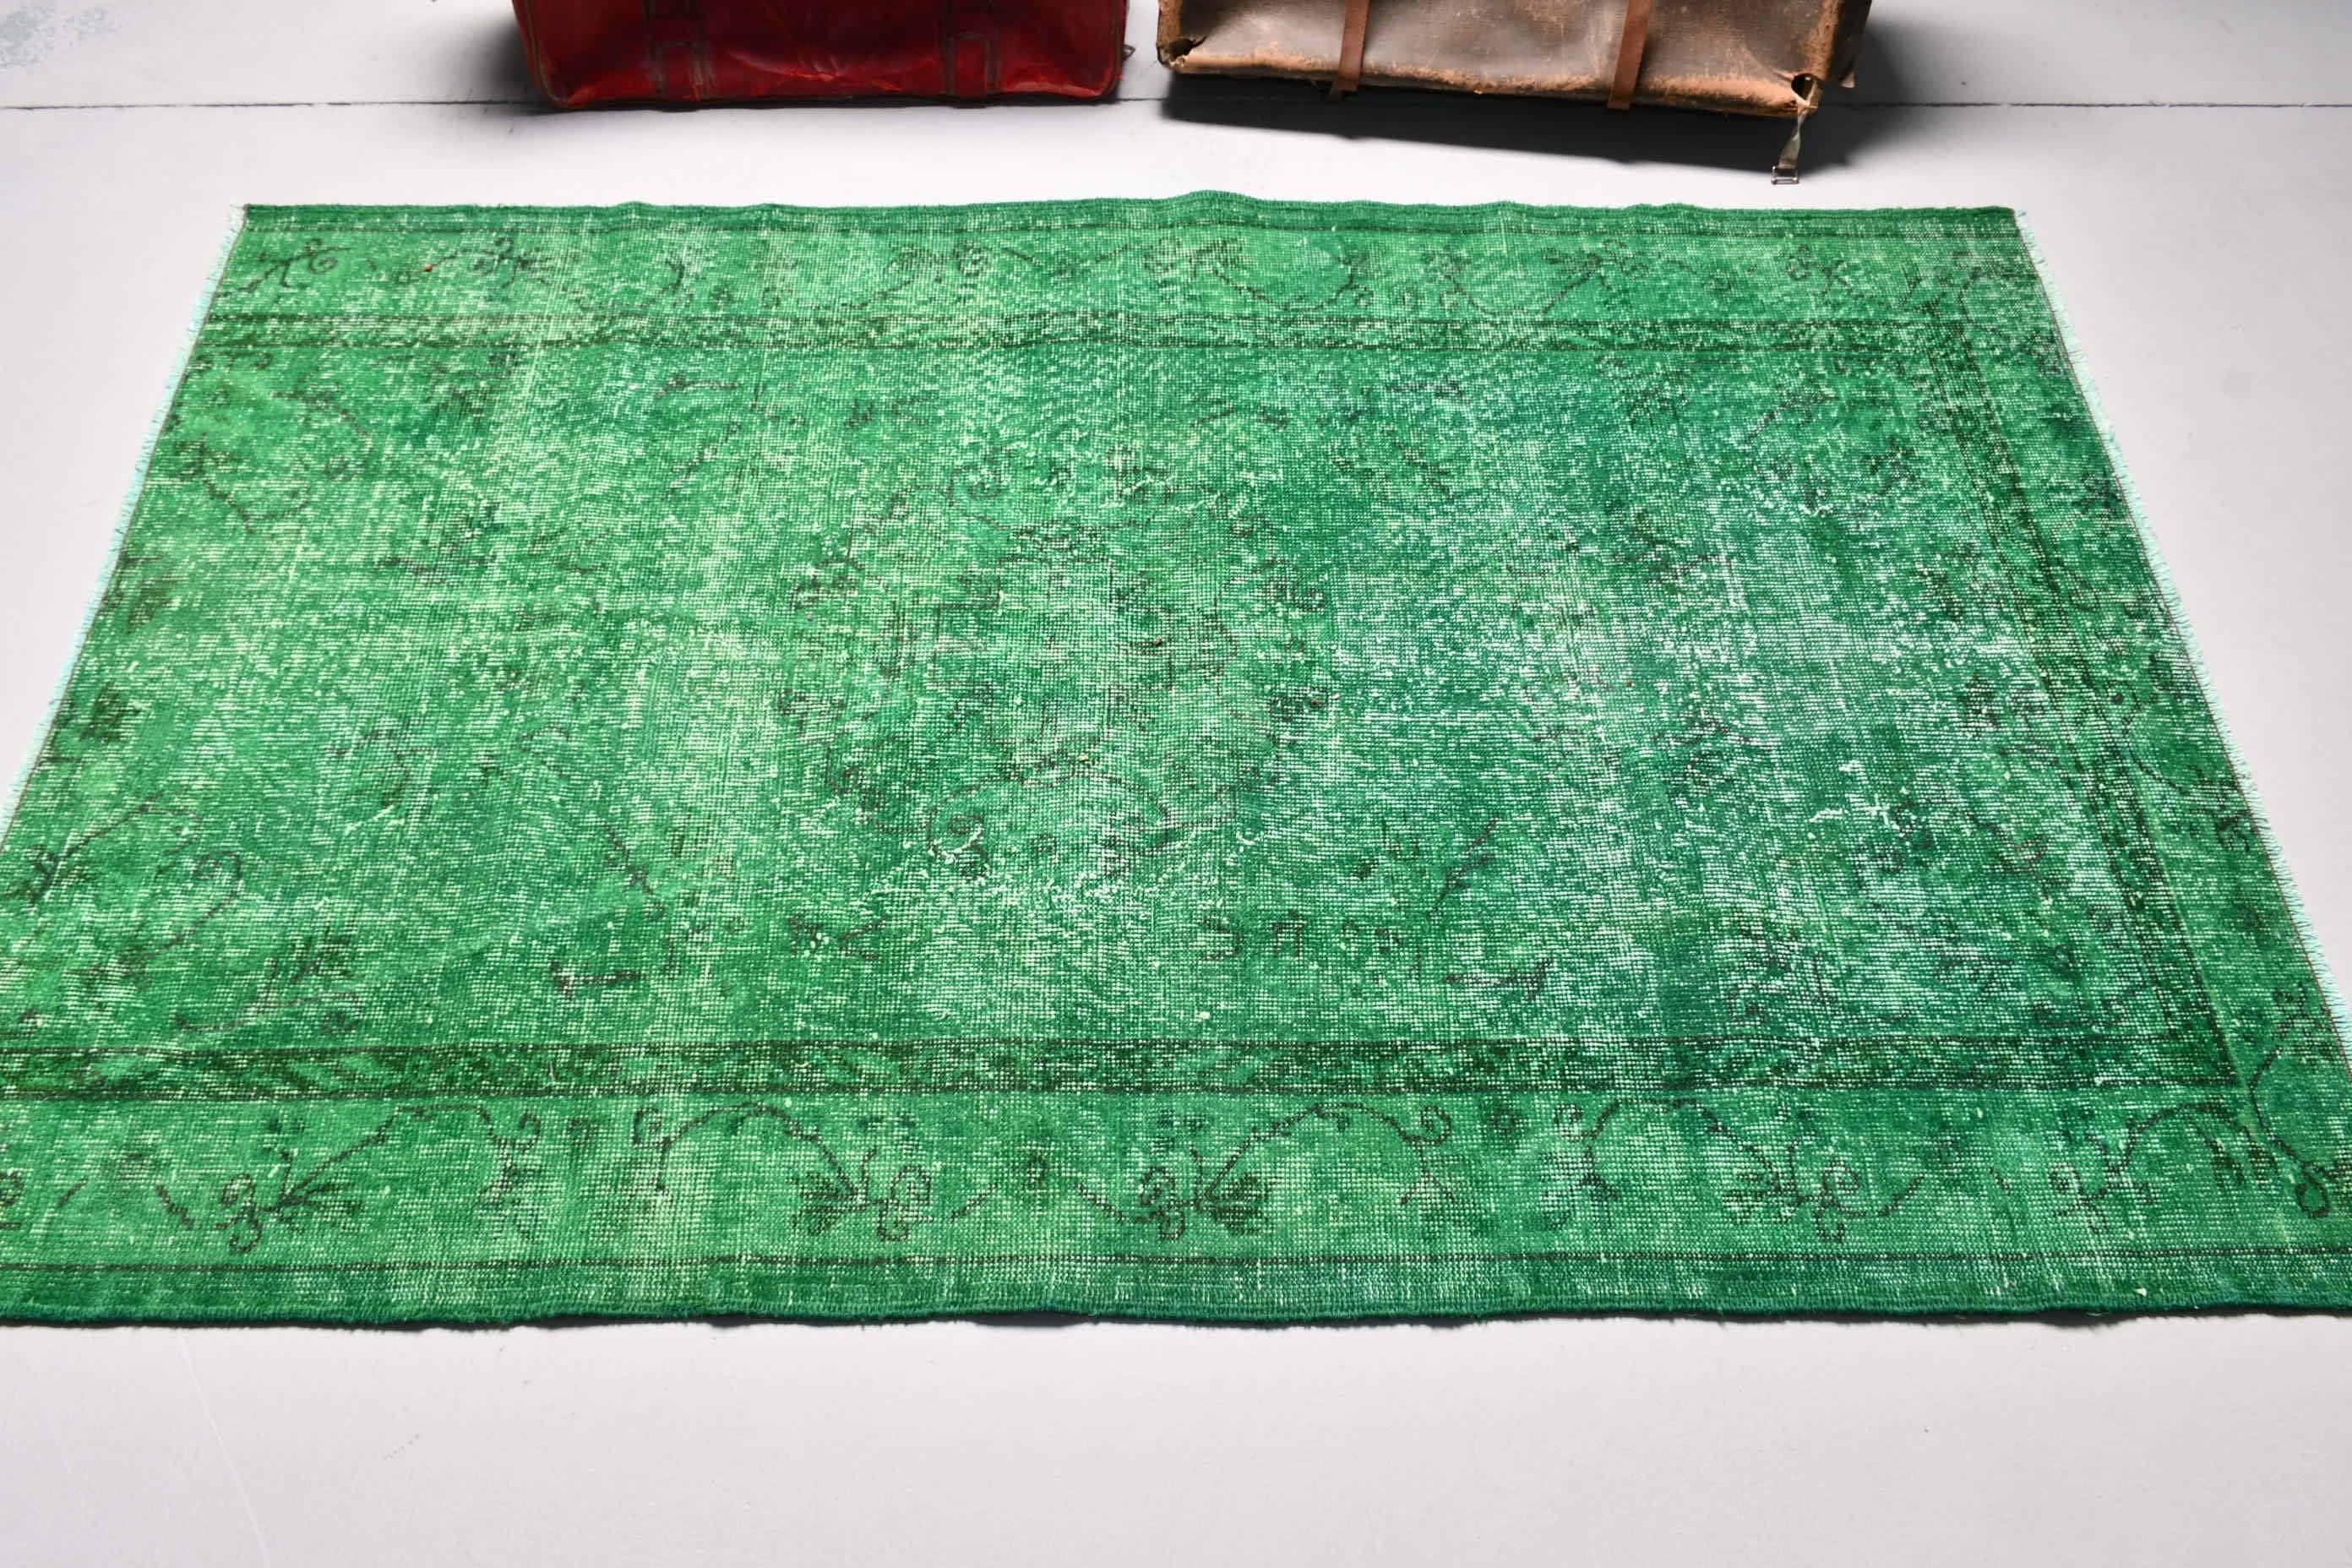 Home Decor Rugs, Turkish Rugs, Bedroom Rugs, Kitchen Rug, Bohemian Rugs, Moroccan Rug, Vintage Rug, 3.8x6.1 ft Accent Rugs, Green Wool Rug